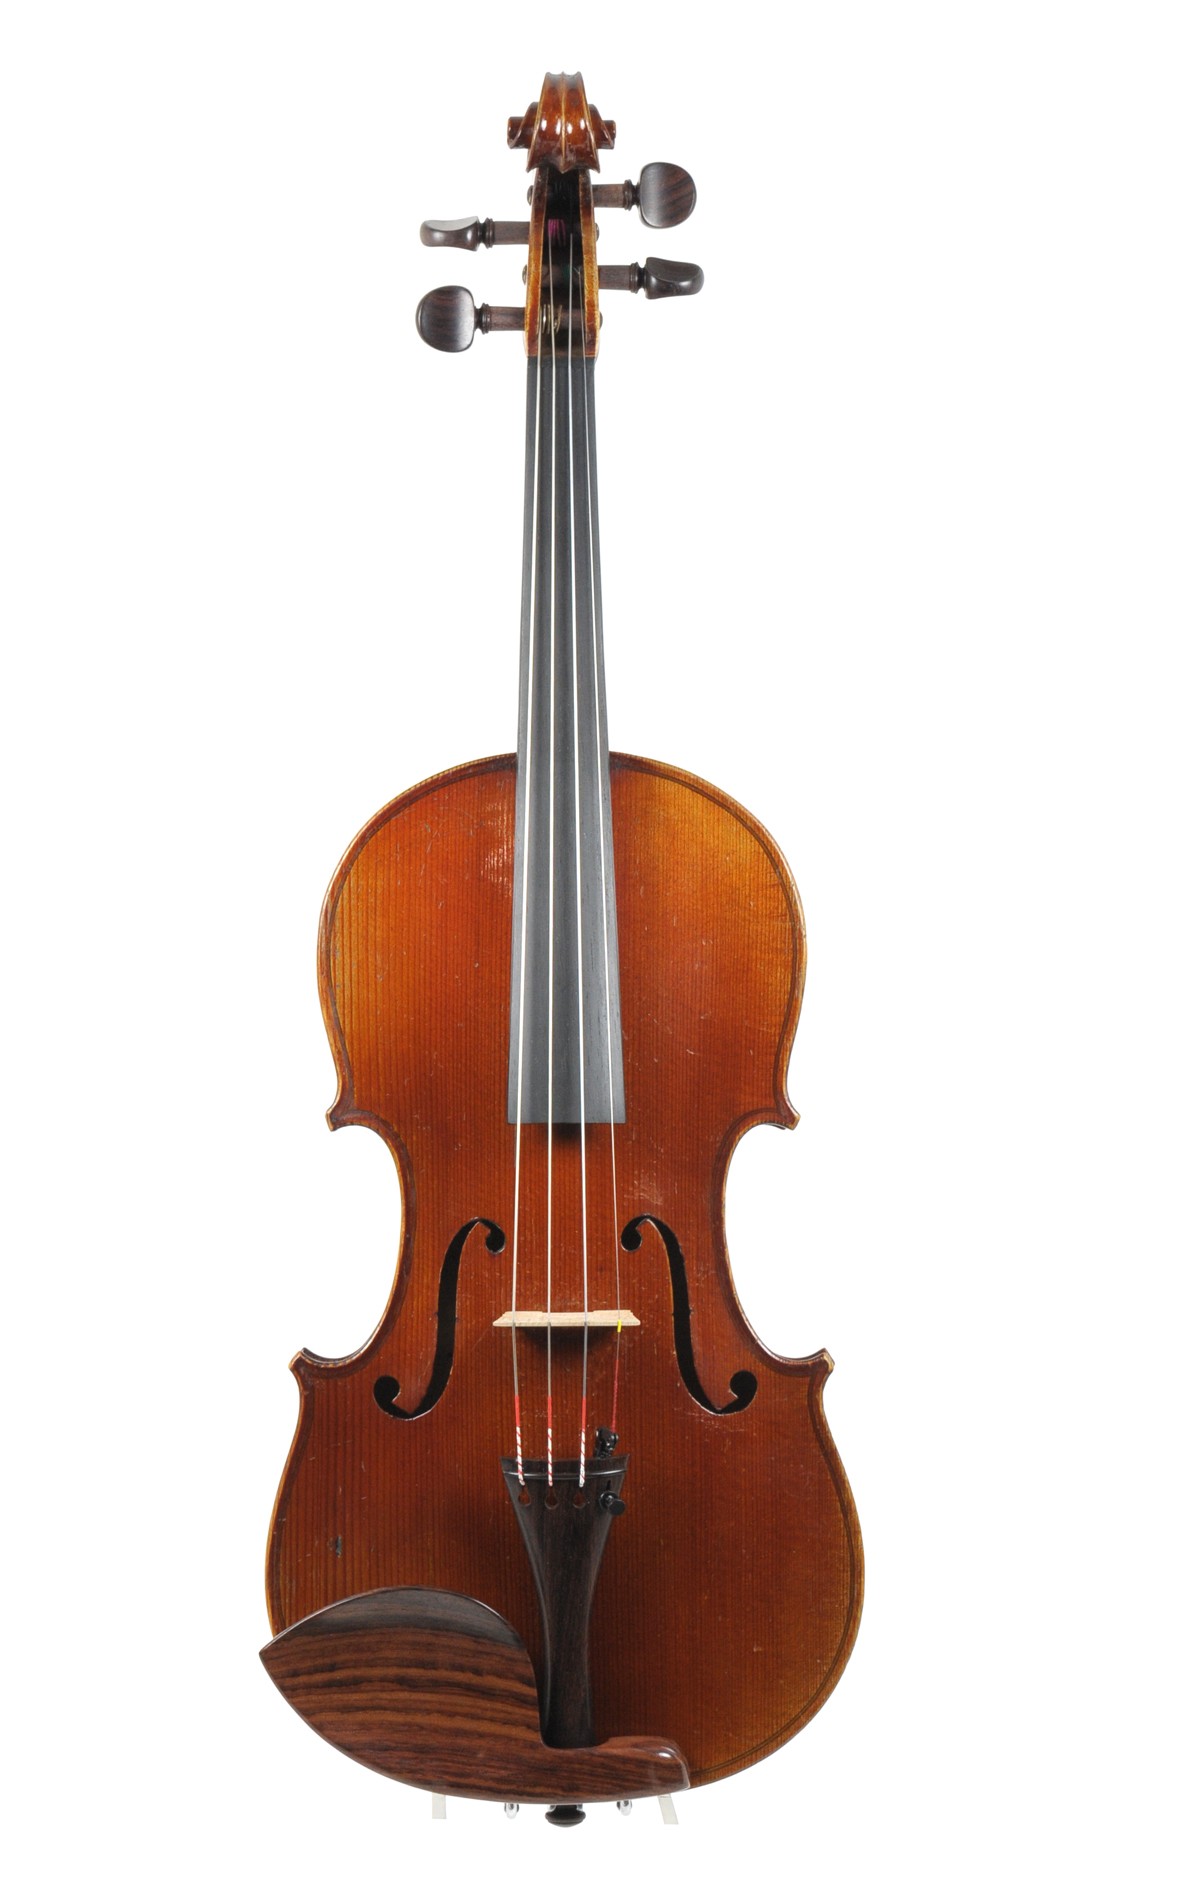 Lady´s violin - 7/8 violin from Mirecourt, approx. 1920 - top